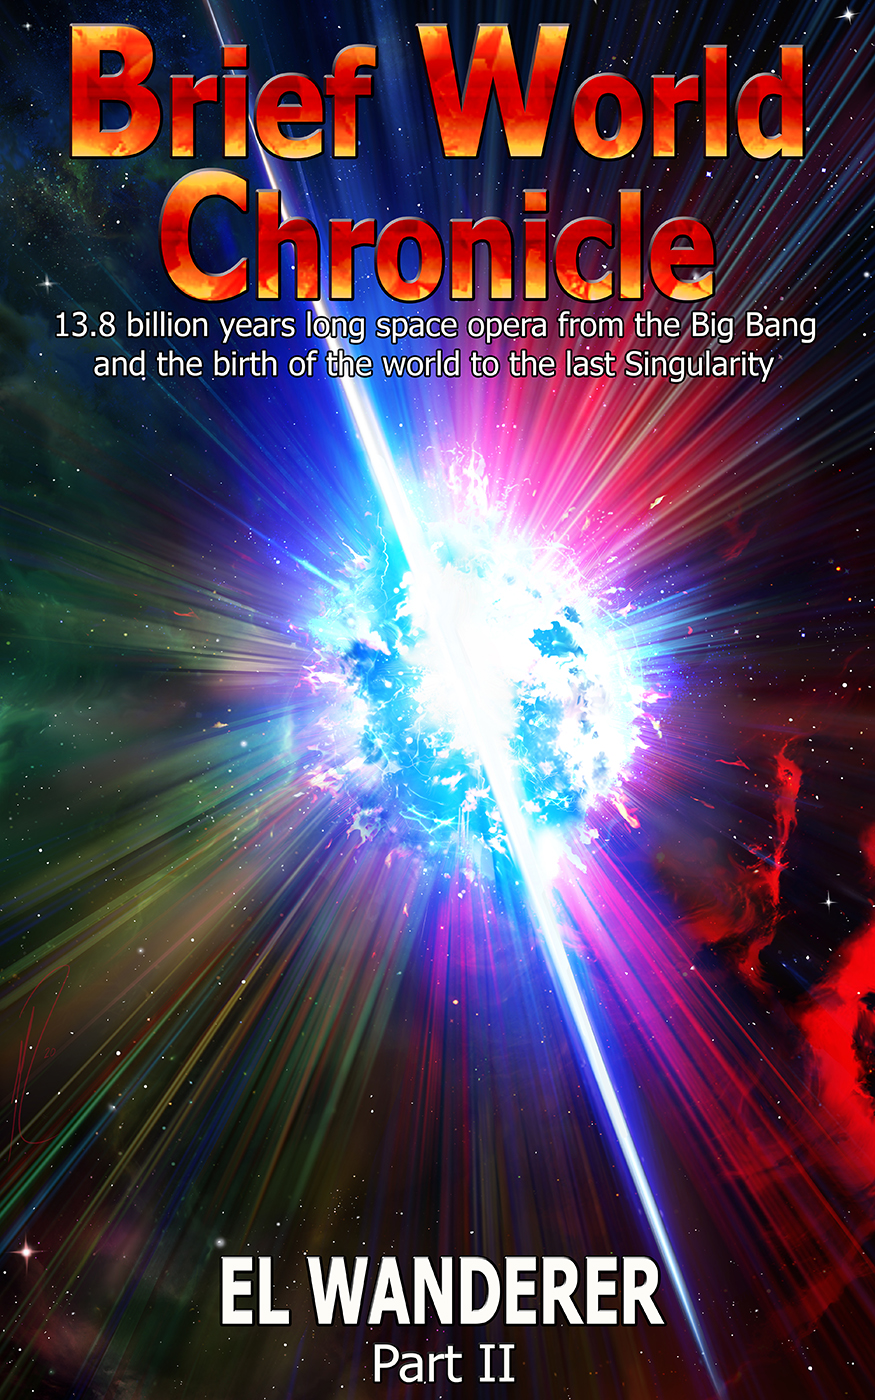 FREE: Brief World Chronicle: 13.8 Billion Years Long Space Opera From the Big Bang and the Birth of the World to the Last Singularity, Part II by El Wanderer